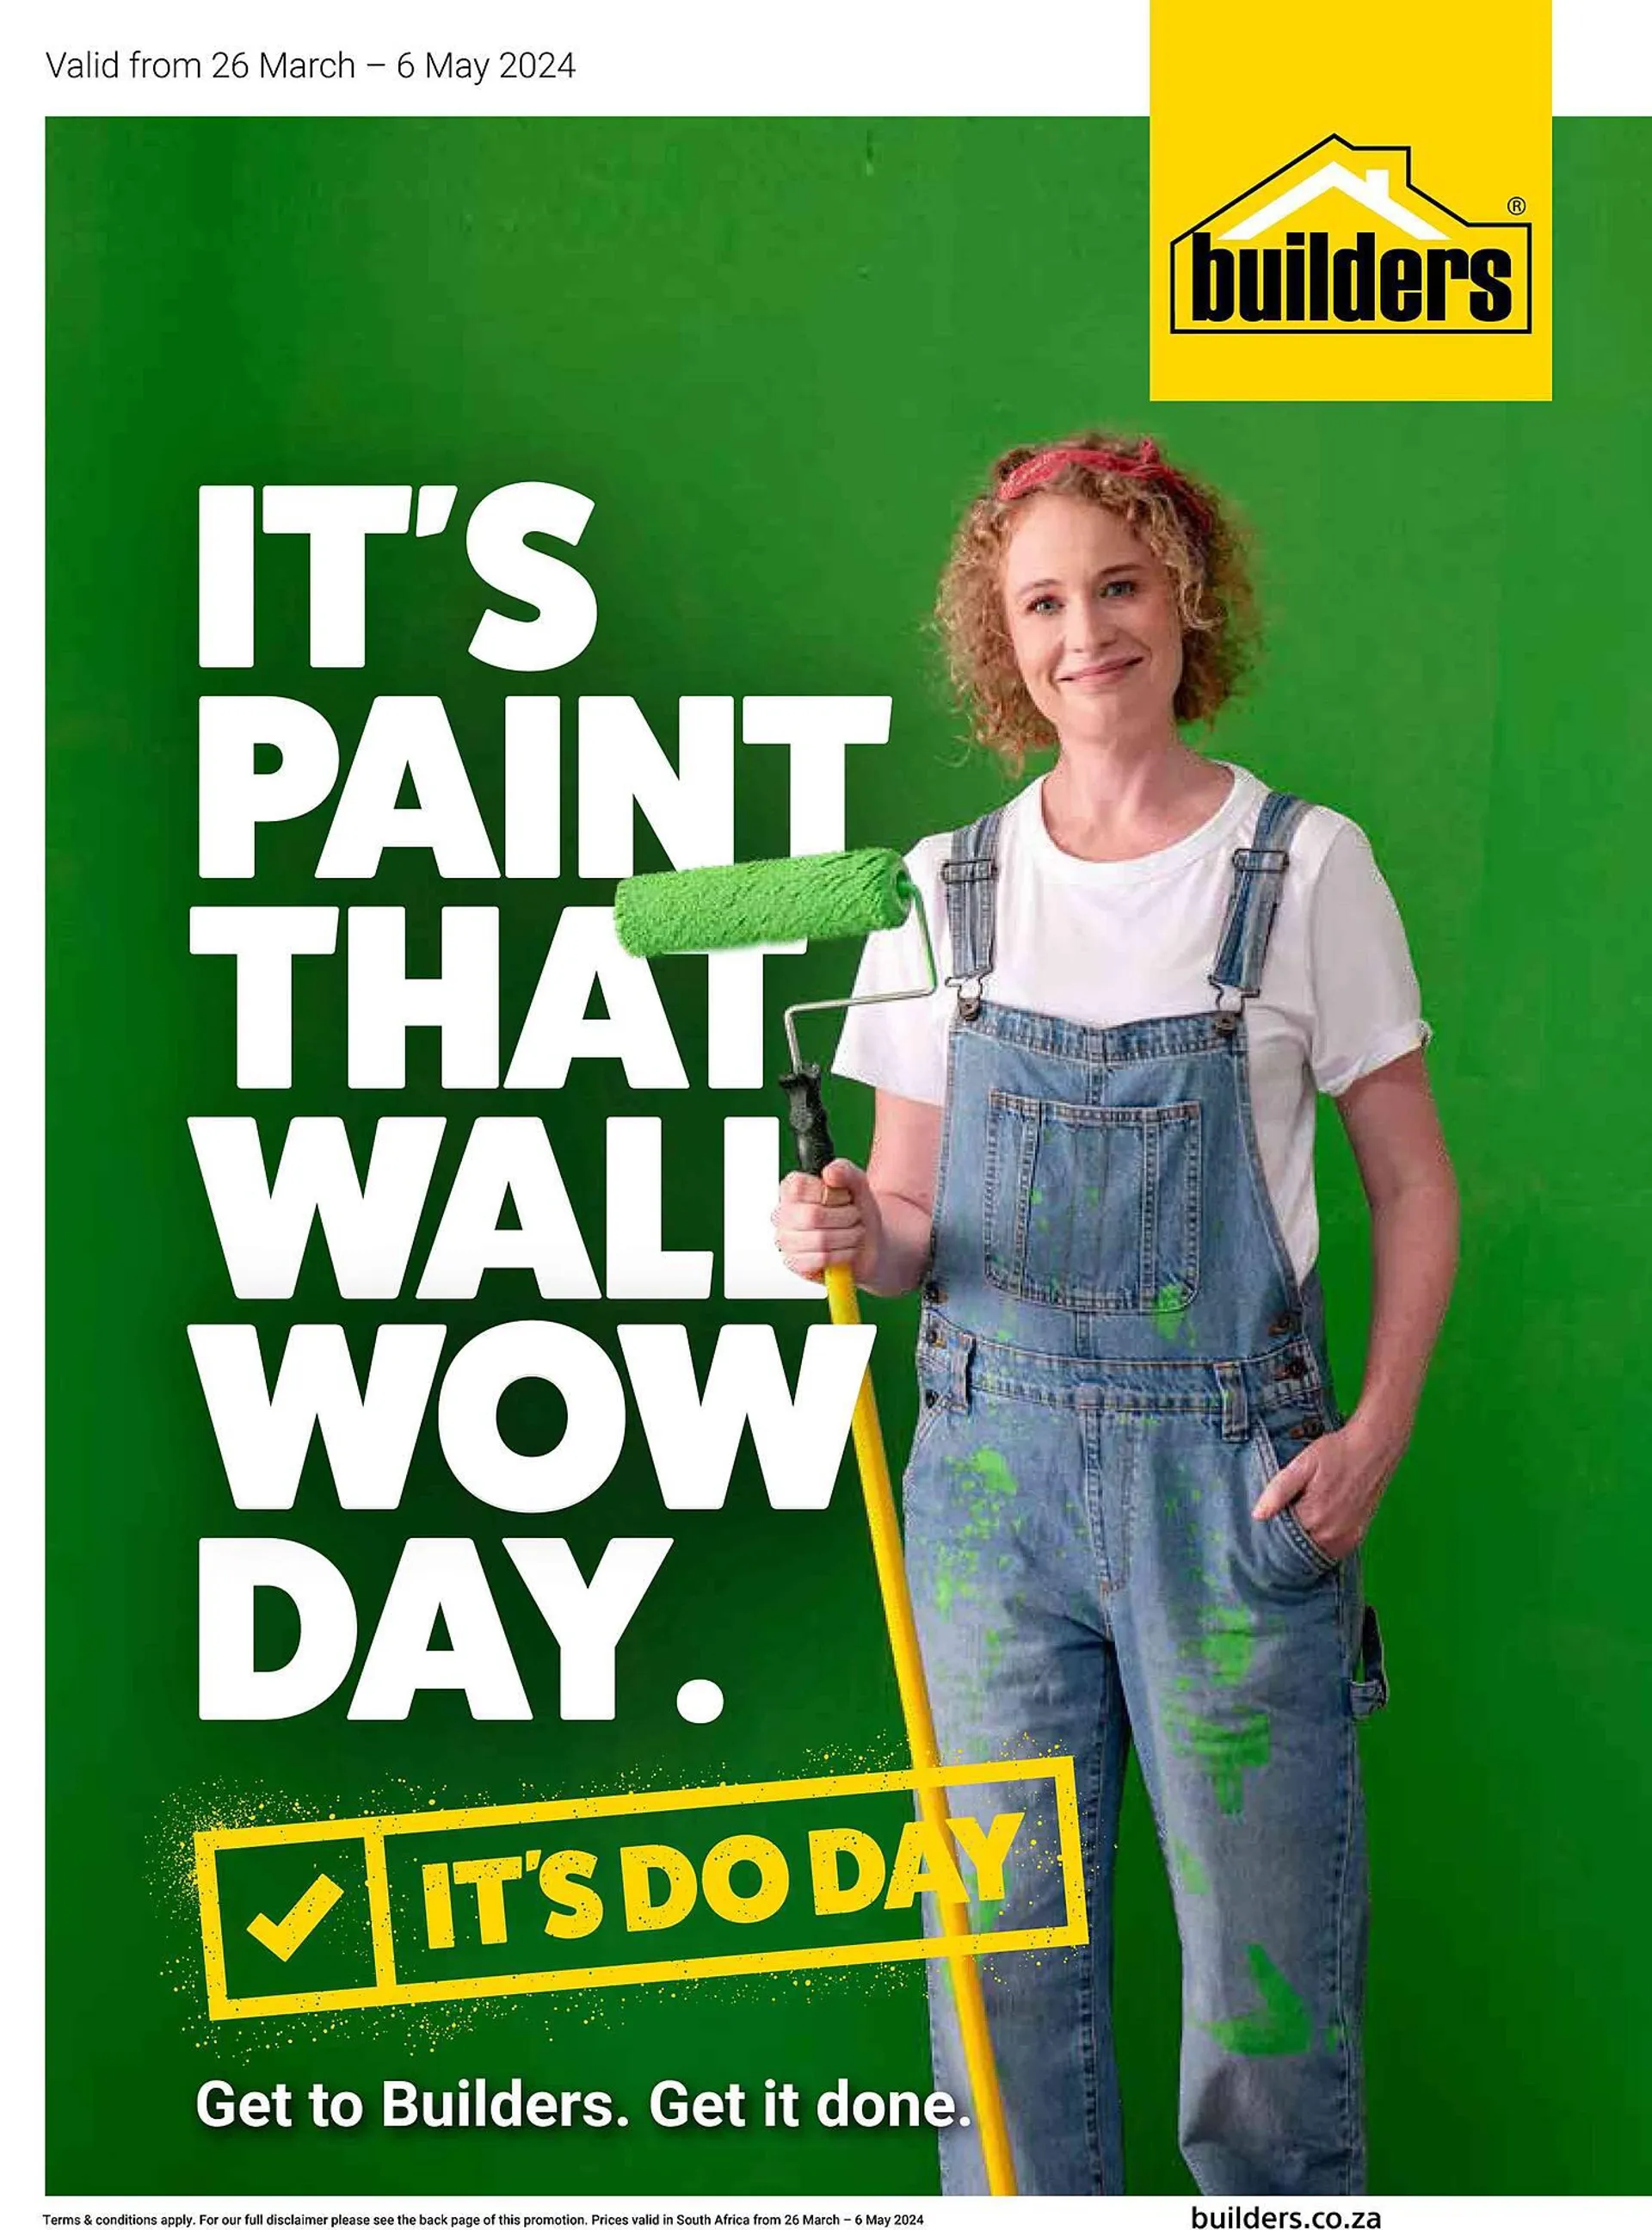 Builders Warehouse catalogue - 26 March 6 May 2024